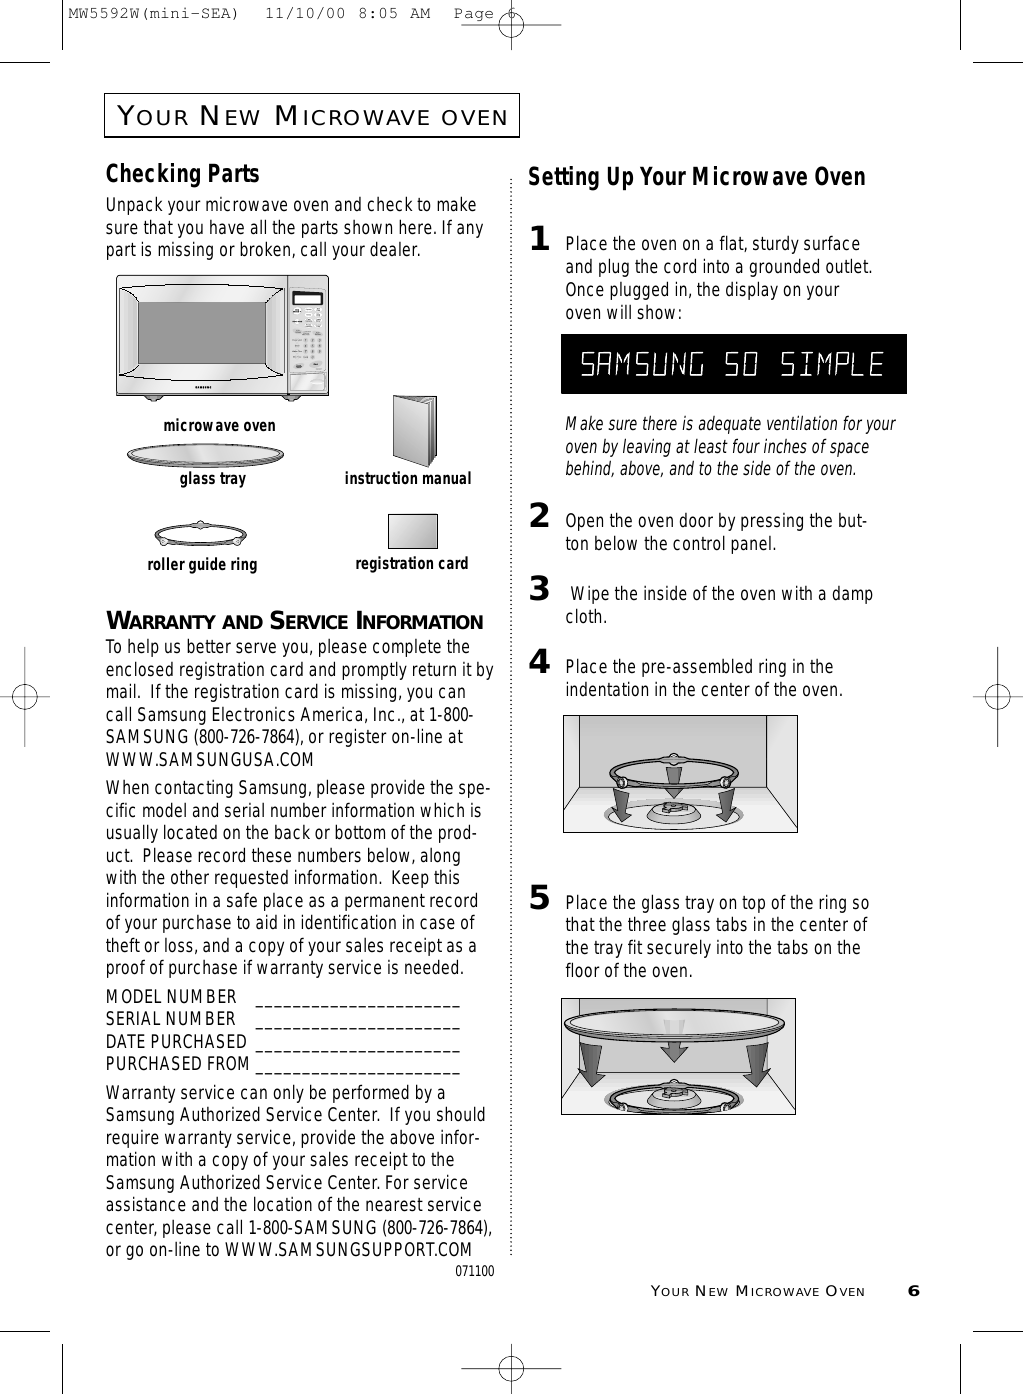 YOURNEWMICROWAVE OVEN6YOURNEWMICROWAVEOVENChecking PartsUnpack your microwave oven and check to makesure that you have all the parts shown here. If anypart is missing or broken, call your dealer.WARRANTY AND SERVICE INFORMATIONTo help us better serve you, please complete theenclosed registration card and promptly return it bymail.  If the registration card is missing, you cancall Samsung Electronics America, Inc., at 1-800-SAMSUNG (800-726-7864), or register on-line atWWW.SAMSUNGUSA.COMWhen contacting Samsung, please provide the spe-cific model and serial number information which isusually located on the back or bottom of the prod-uct.  Please record these numbers below, alongwith the other requested information.  Keep thisinformation in a safe place as a permanent recordof your purchase to aid in identification in case oftheft or loss, and a copy of your sales receipt as aproof of purchase if warranty service is needed. MODEL NUMBER ______________________SERIAL NUMBER ______________________DATE PURCHASED ______________________PURCHASED FROM______________________Warranty service can only be performed by aSamsung Authorized Service Center.  If you shouldrequire warranty service, provide the above infor-mation with a copy of your sales receipt to theSamsung Authorized Service Center. For serviceassistance and the location of the nearest servicecenter, please call 1-800-SAMSUNG (800-726-7864),or go on-line to WWW.SAMSUNGSUPPORT.COM071100Setting Up Your Microwave Oven1Place the oven on a flat, sturdy surfaceand plug the cord into a grounded outlet.Once plugged in, the display on youroven will show:Make sure there is adequate ventilation for youroven by leaving at least four inches of spacebehind, above, and to the side of the oven. 2Open the oven door by pressing the but-ton below the control panel.3Wipe the inside of the oven with a dampcloth.4Place the pre-assembled ring in theindentation in the center of the oven.5Place the glass tray on top of the ring sothat the three glass tabs in the center ofthe tray fit securely into the tabs on thefloor of the oven.microwave ovenglass trayroller guide ringinstruction manualregistration cardMICRO HELPMW5592W(mini-SEA)  11/10/00 8:05 AM  Page 6